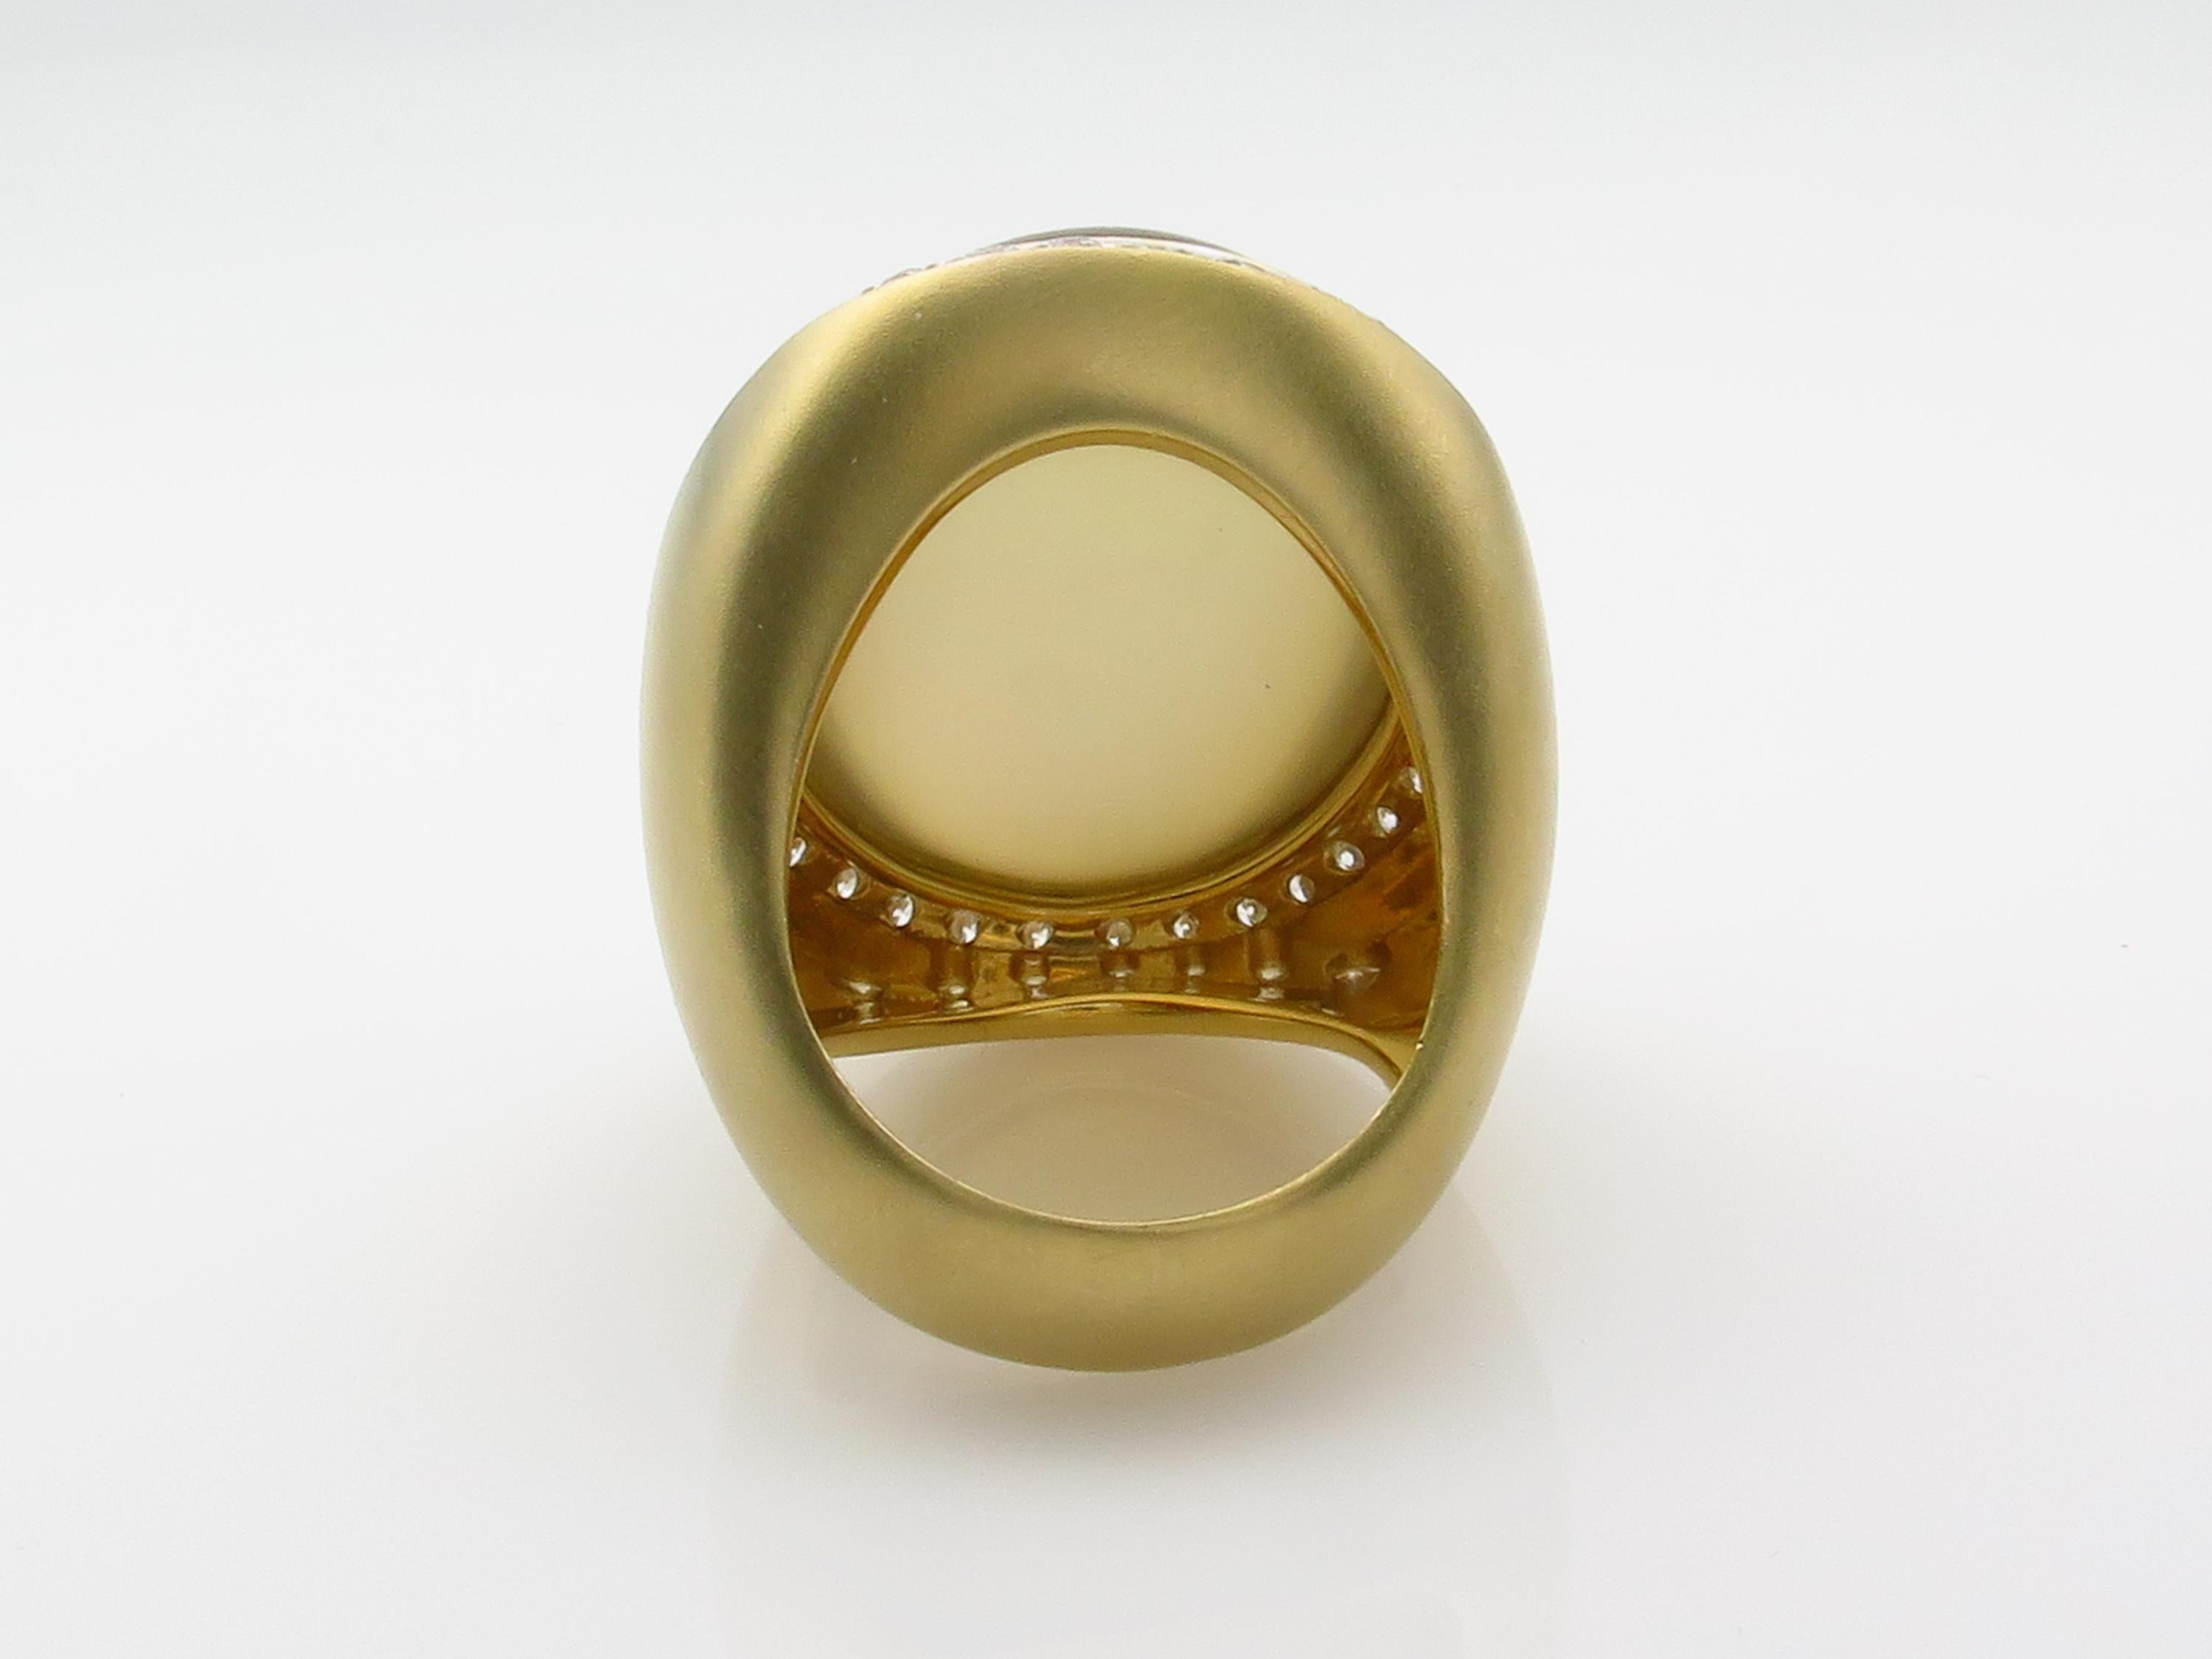 Fashion Cabochon Lemon Quartz Mother of Pearl Diamond 18 Karat Gold Estate Ring In Good Condition For Sale In New York, NY